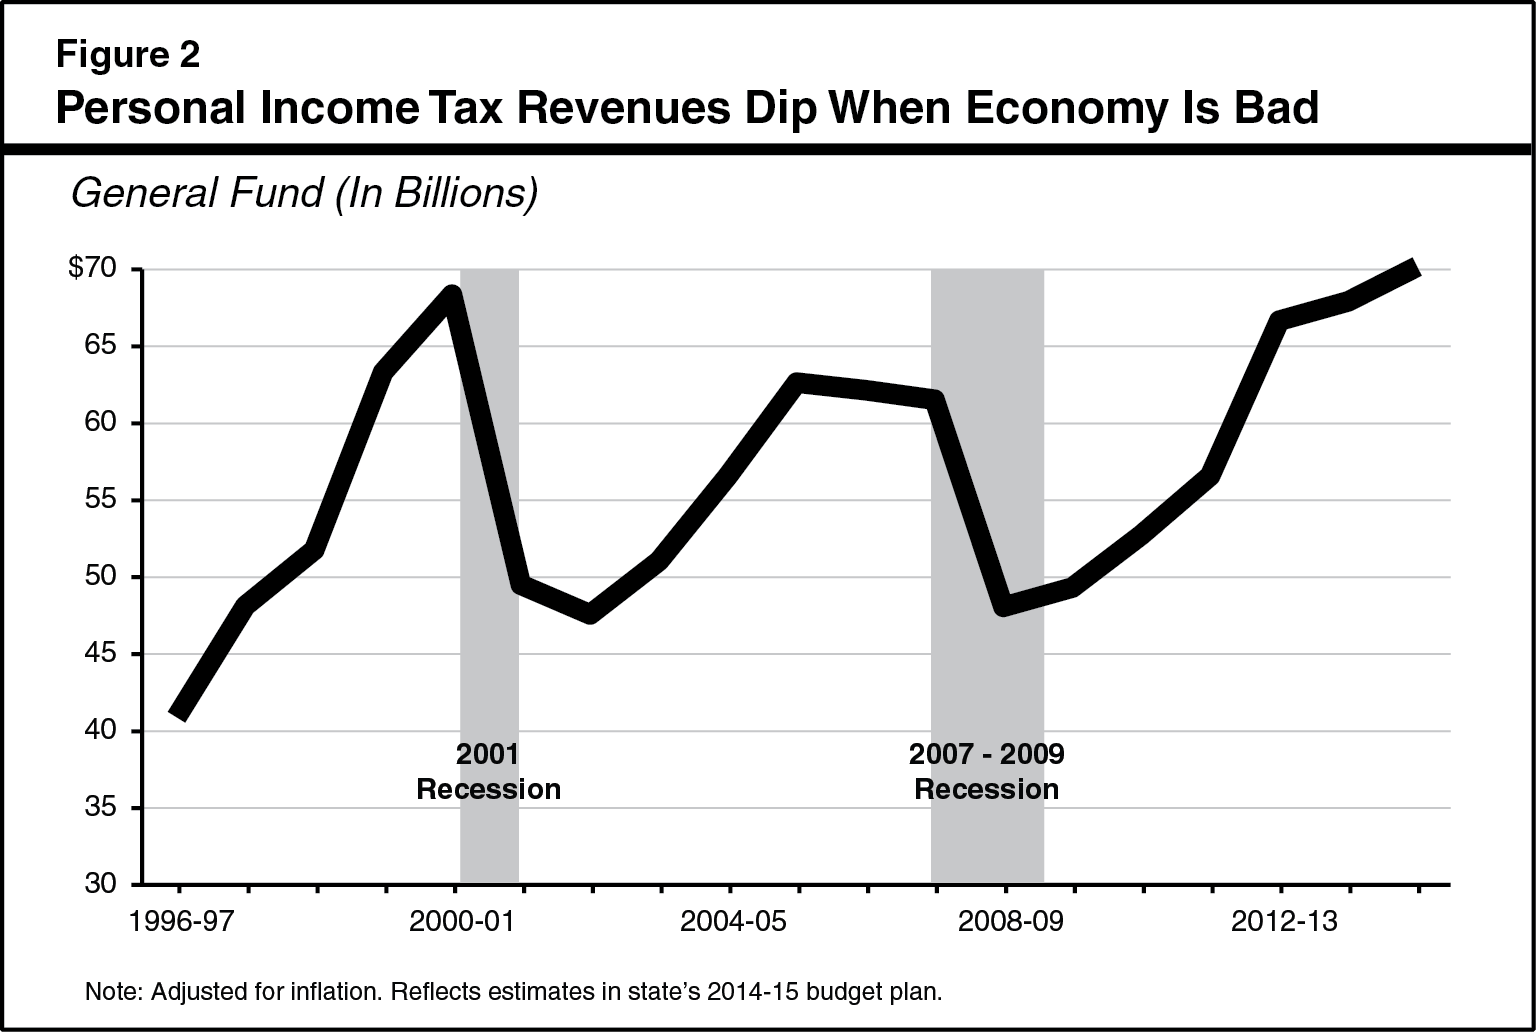 Fig 2 - Personal Income Tax Revenues Dip When Economy Is Bad